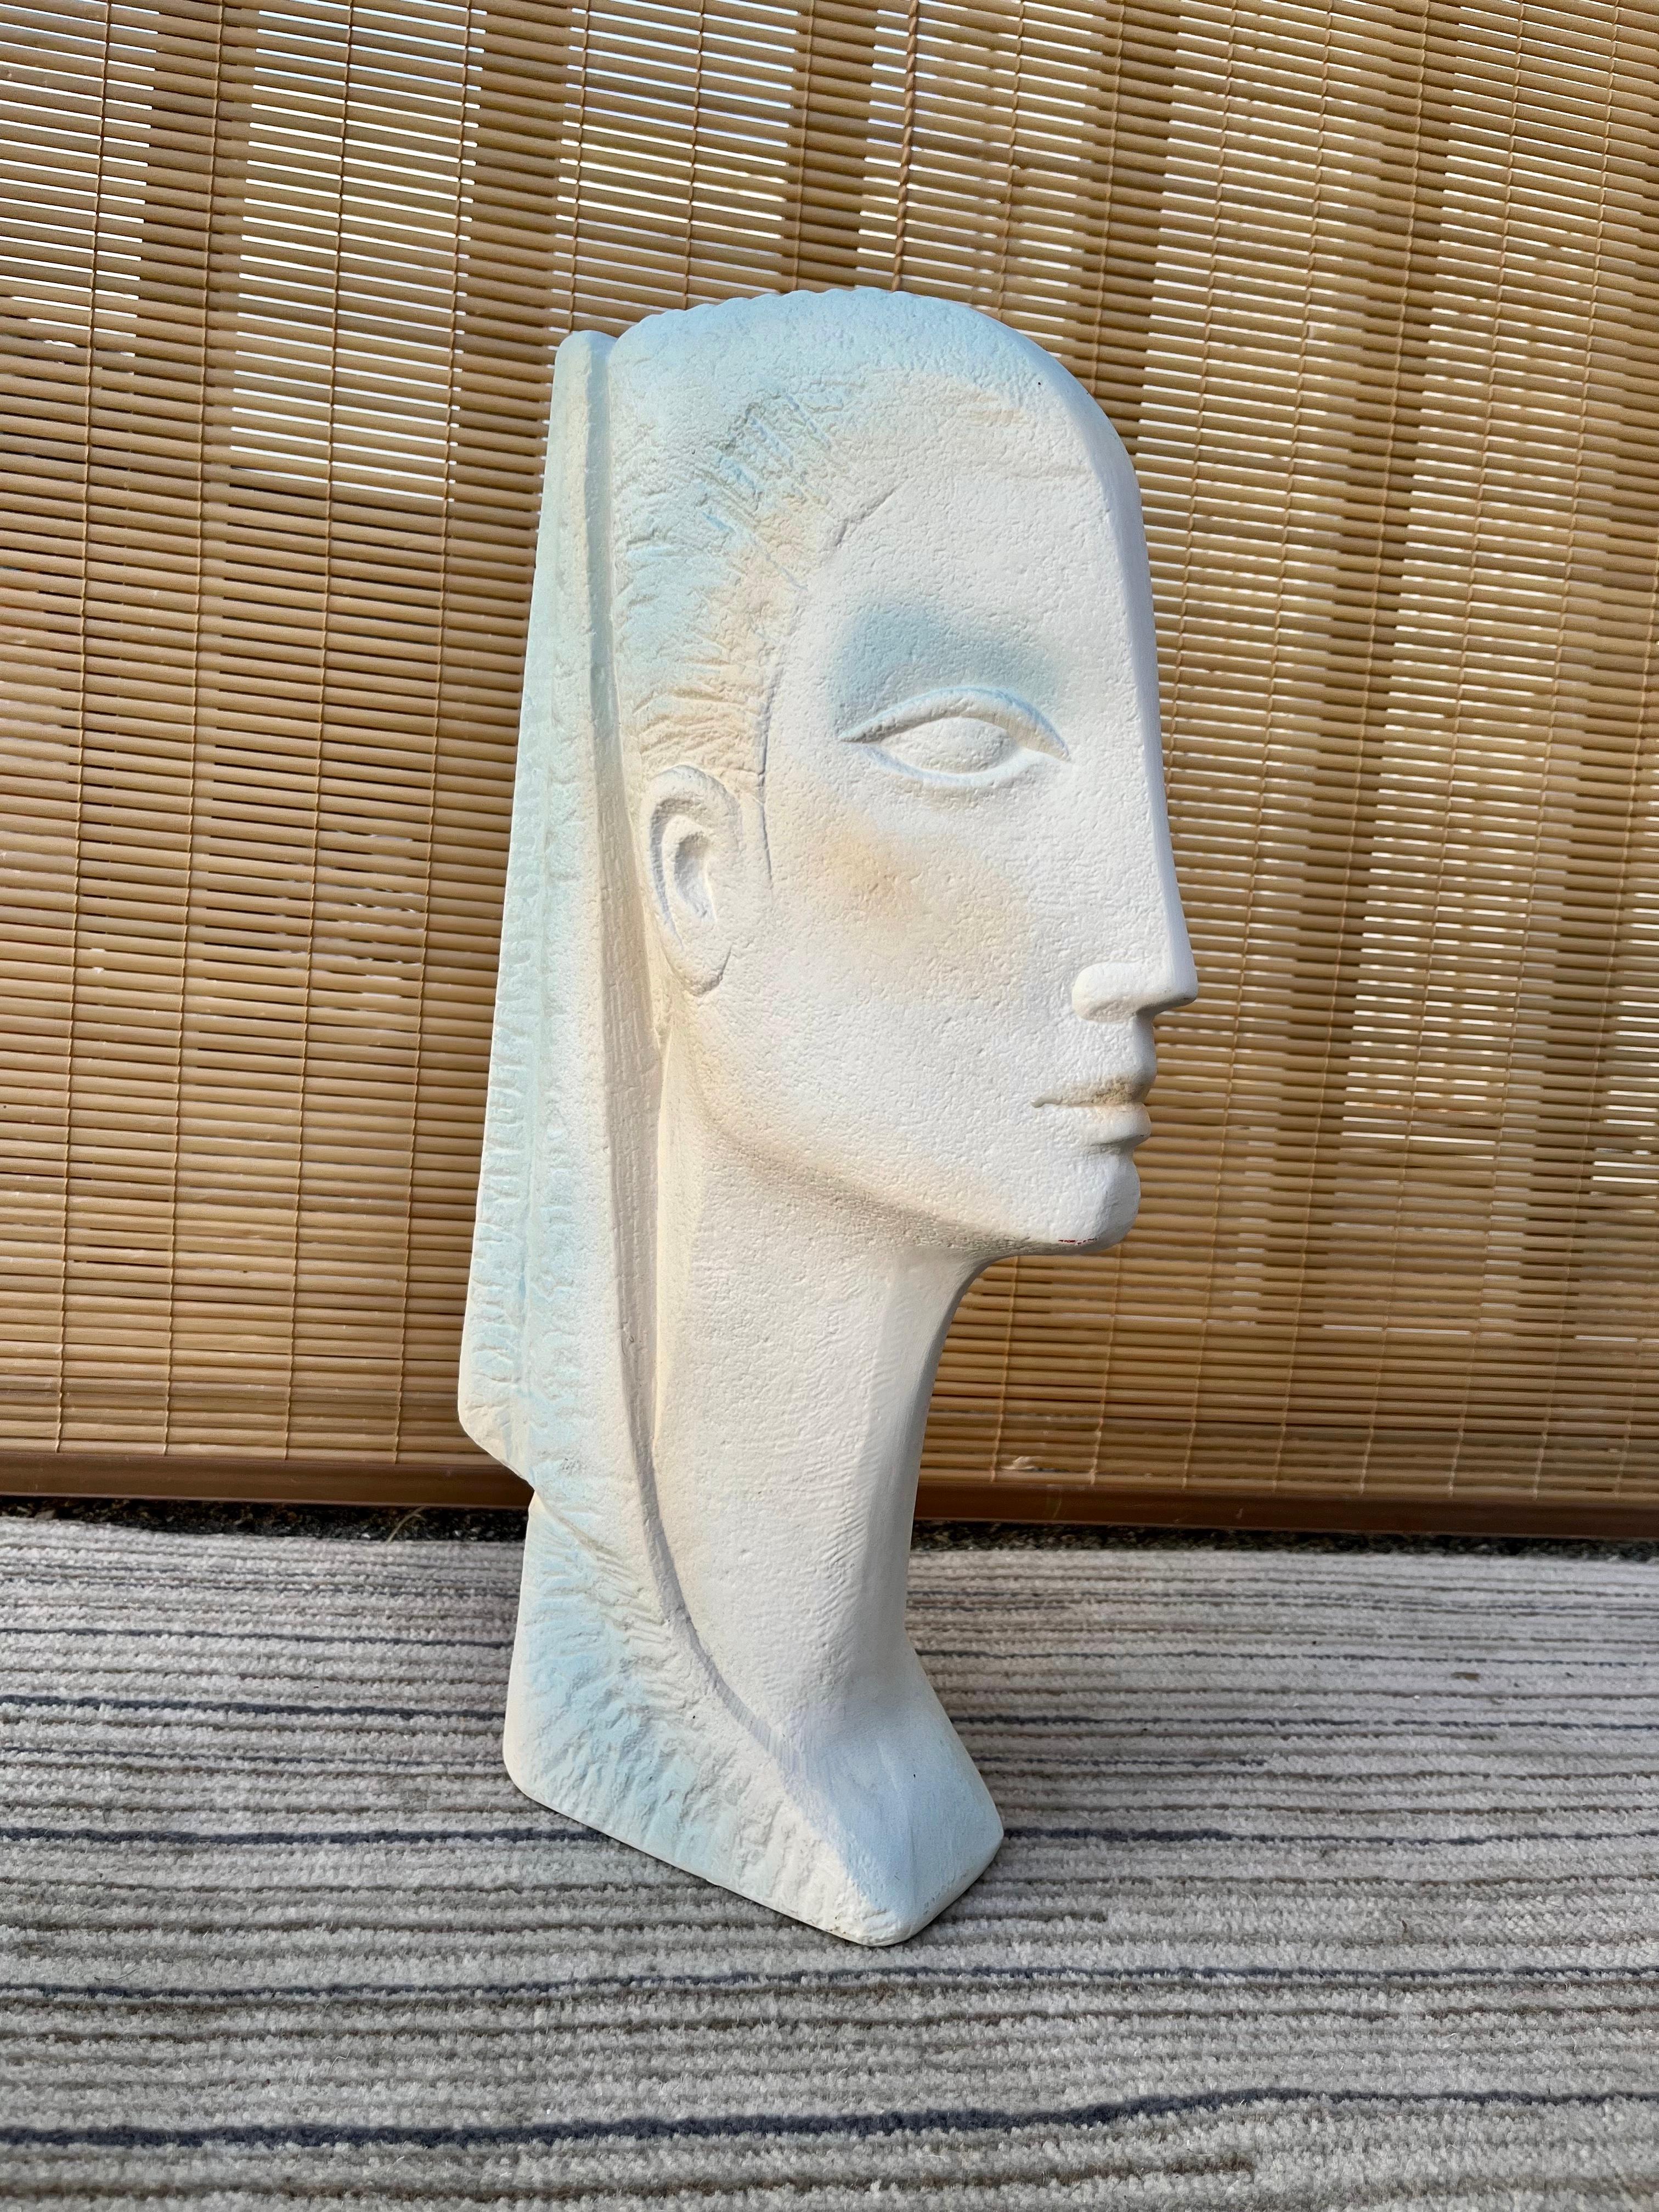 Vintage Large scale, Postmodern / 1980s Art Deco revival Female Head Ceramic Sculpture in the Austin Productions Style. Circa 1980s
Features a flatten female head figure molded on a hollow textured off-white ceramic with pastel colors accent